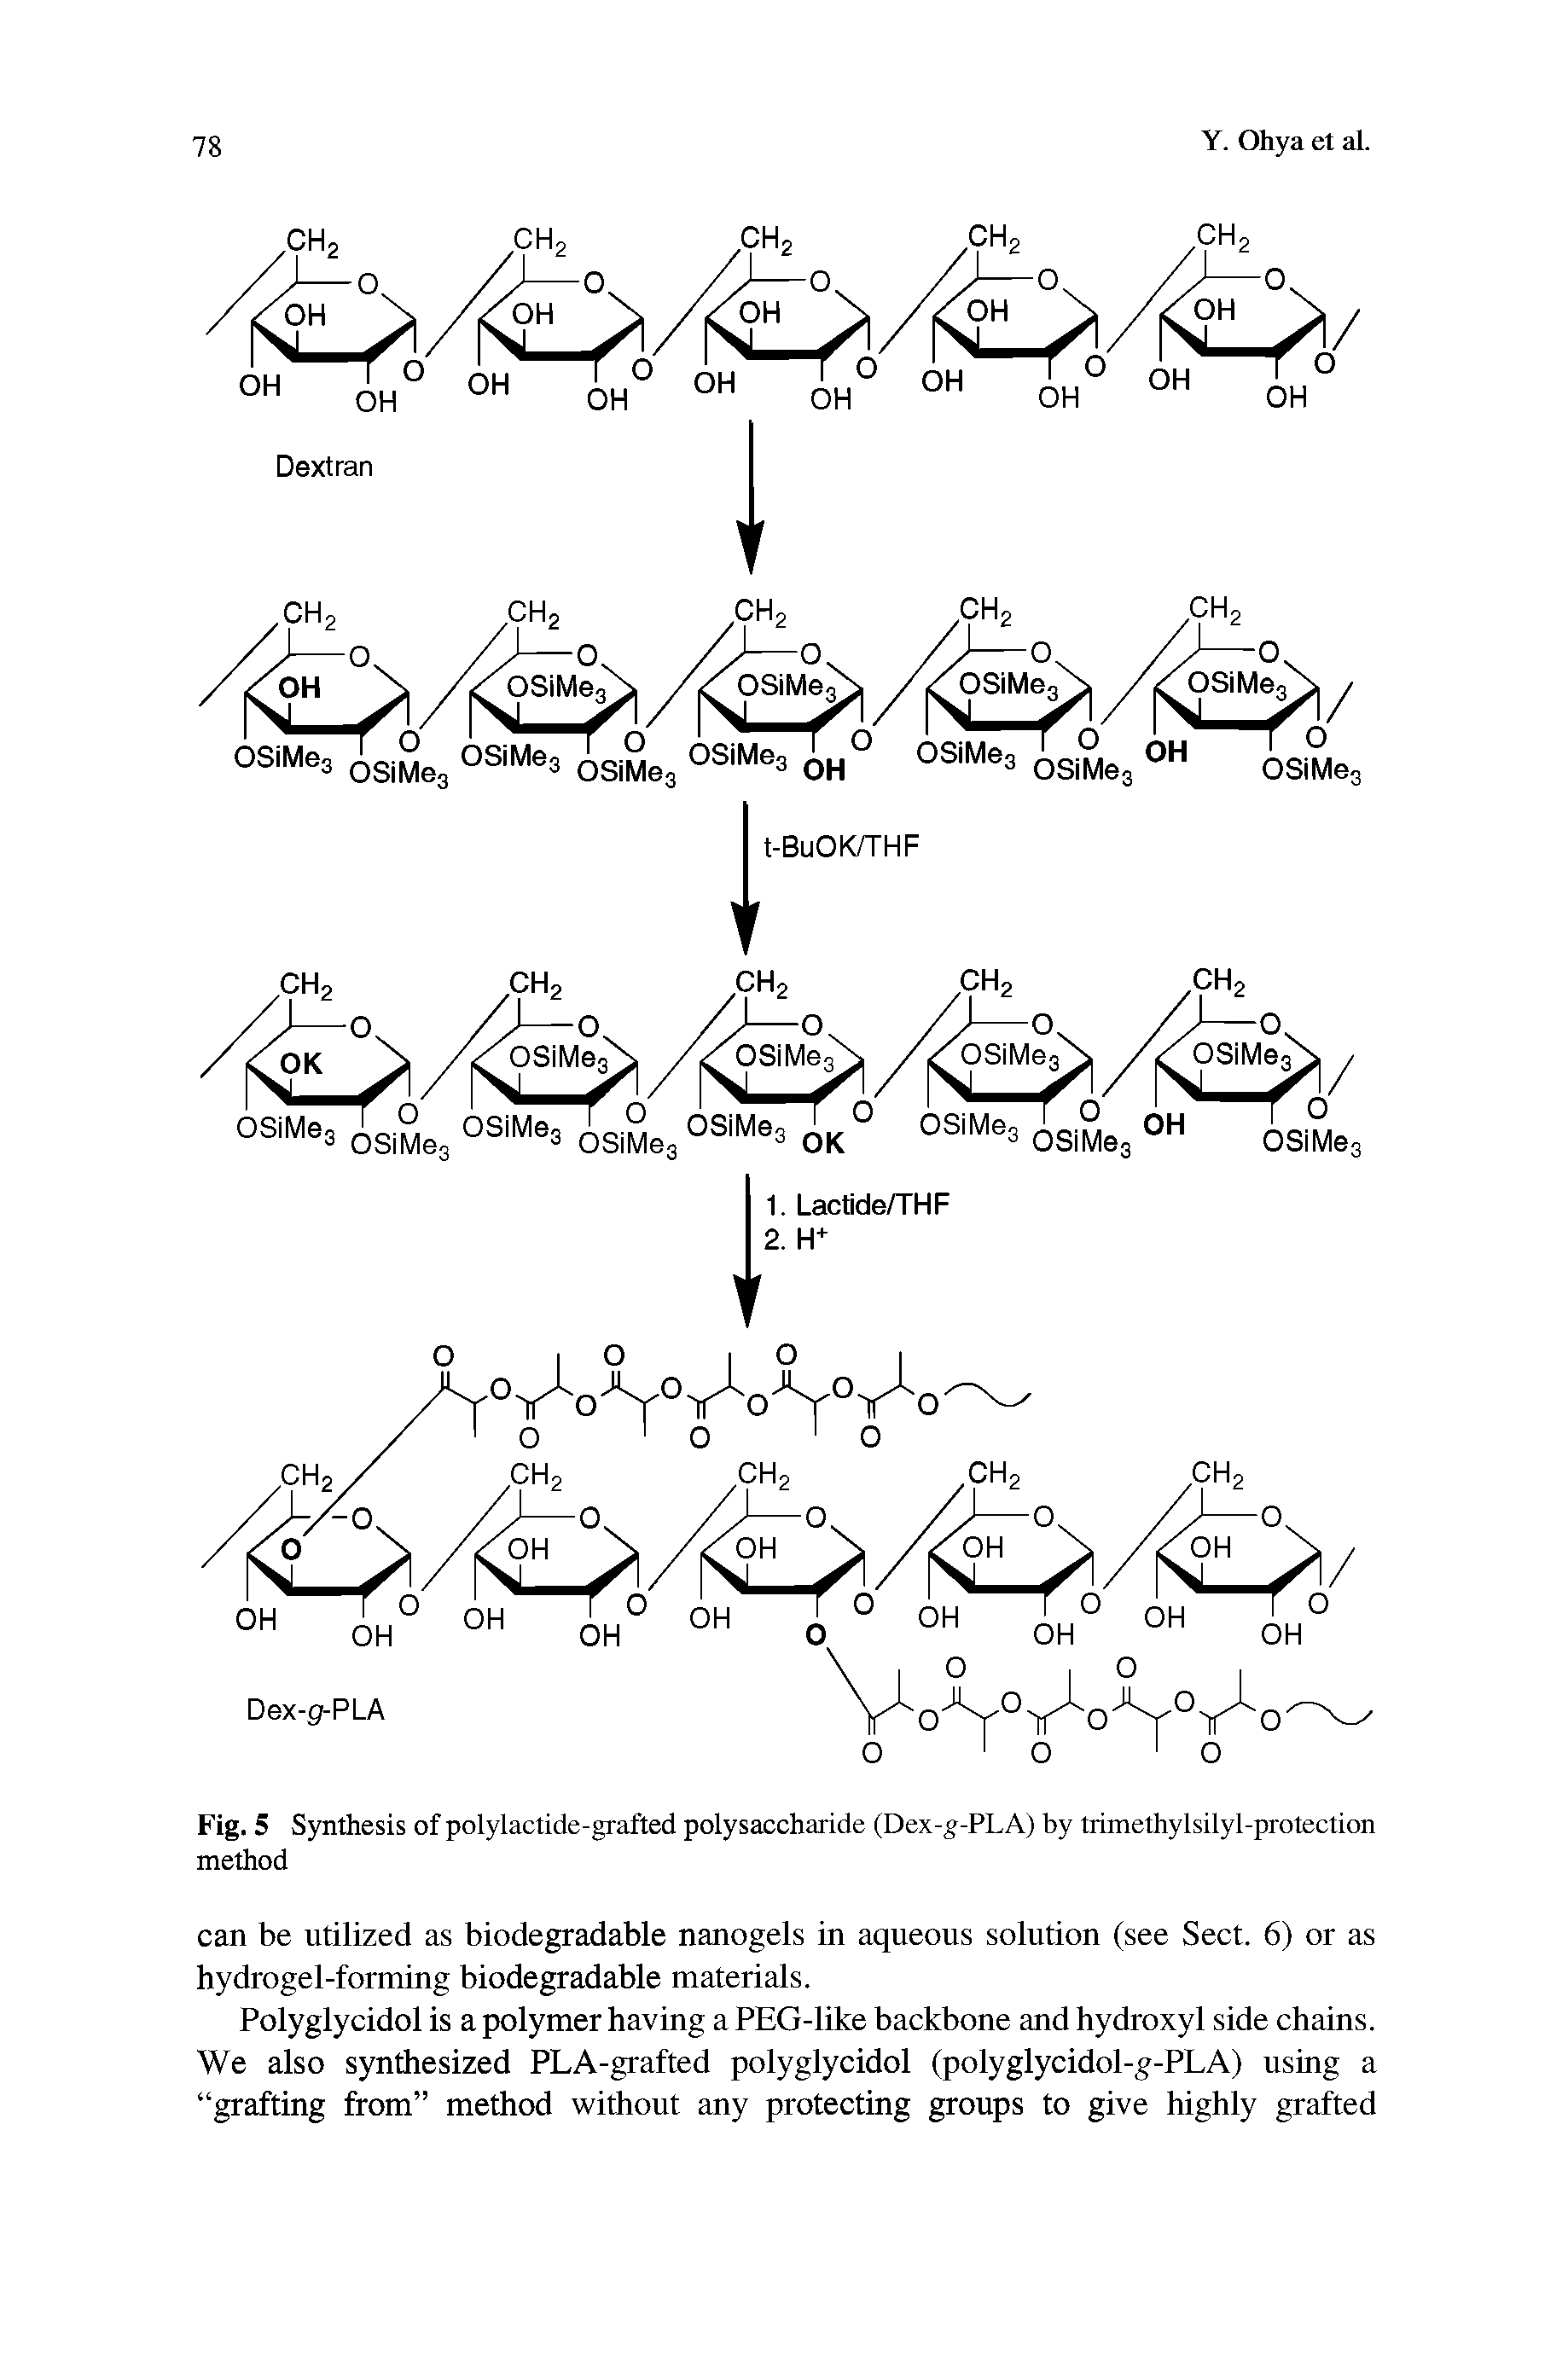 Fig. 5 Synthesis of polylactide-grafted polysaccharide (Dex-g-PLA) by trimethylsilyl-protection method...